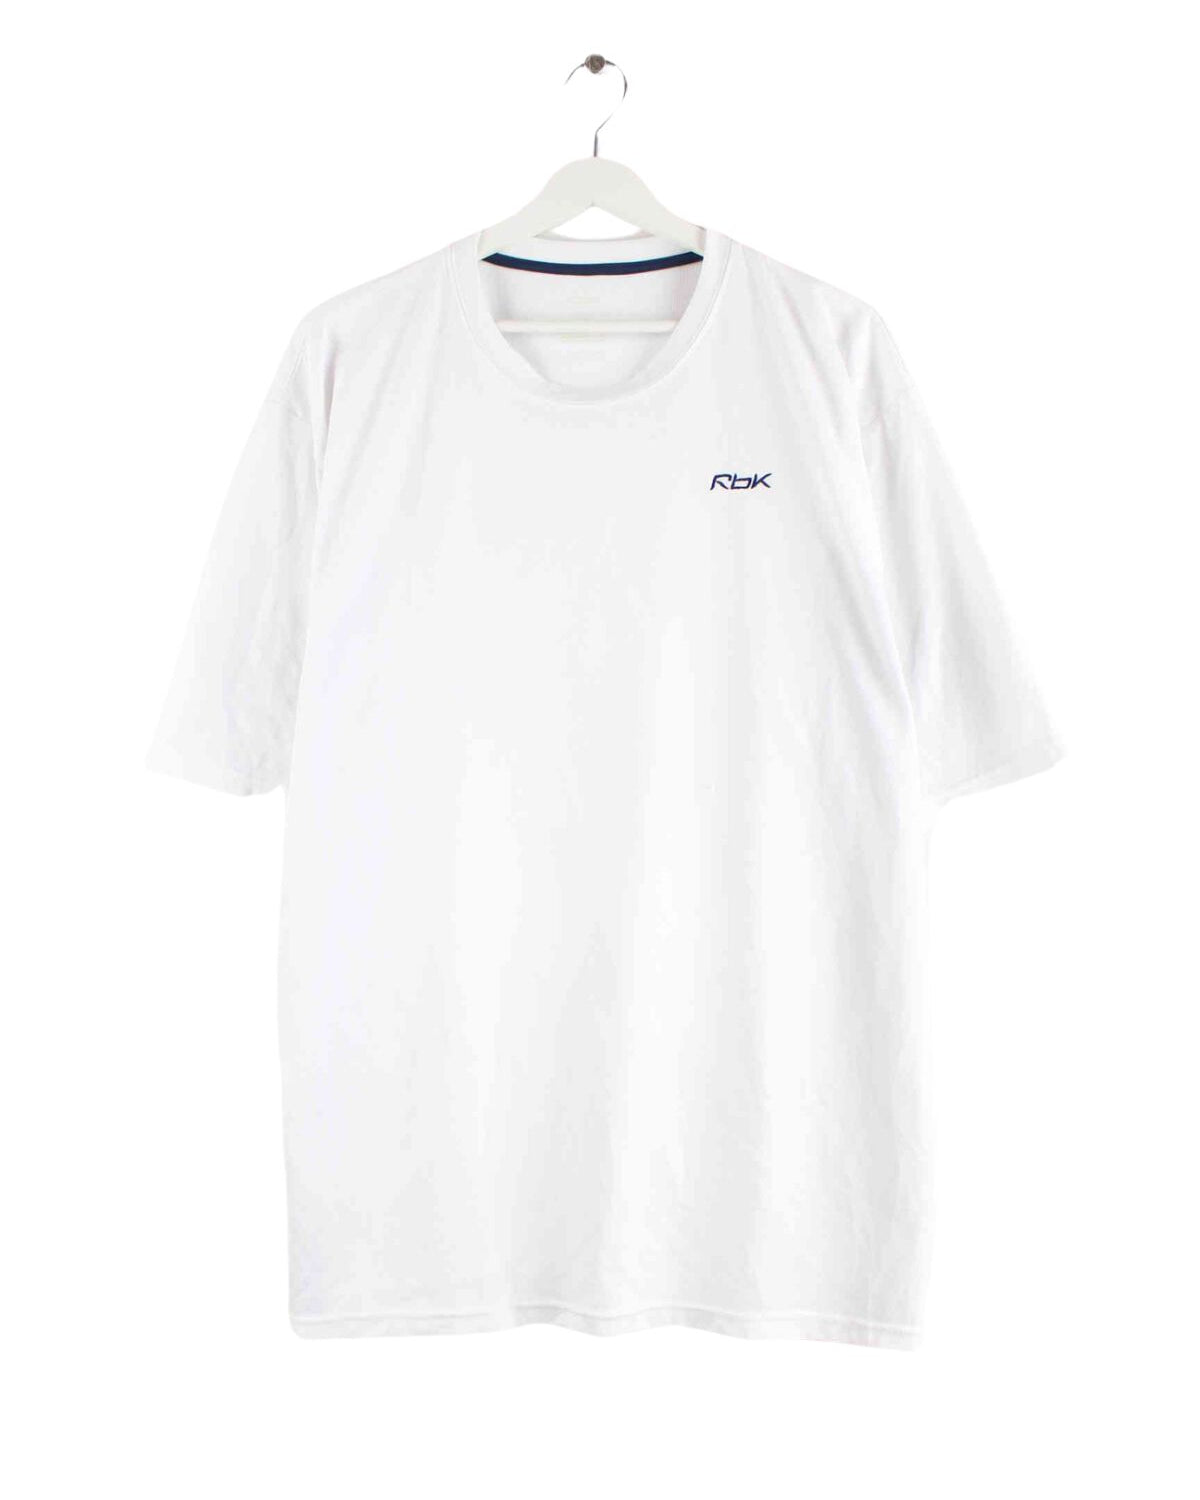 Reebok Embroidered T-Shirt Weiß XL (front image)